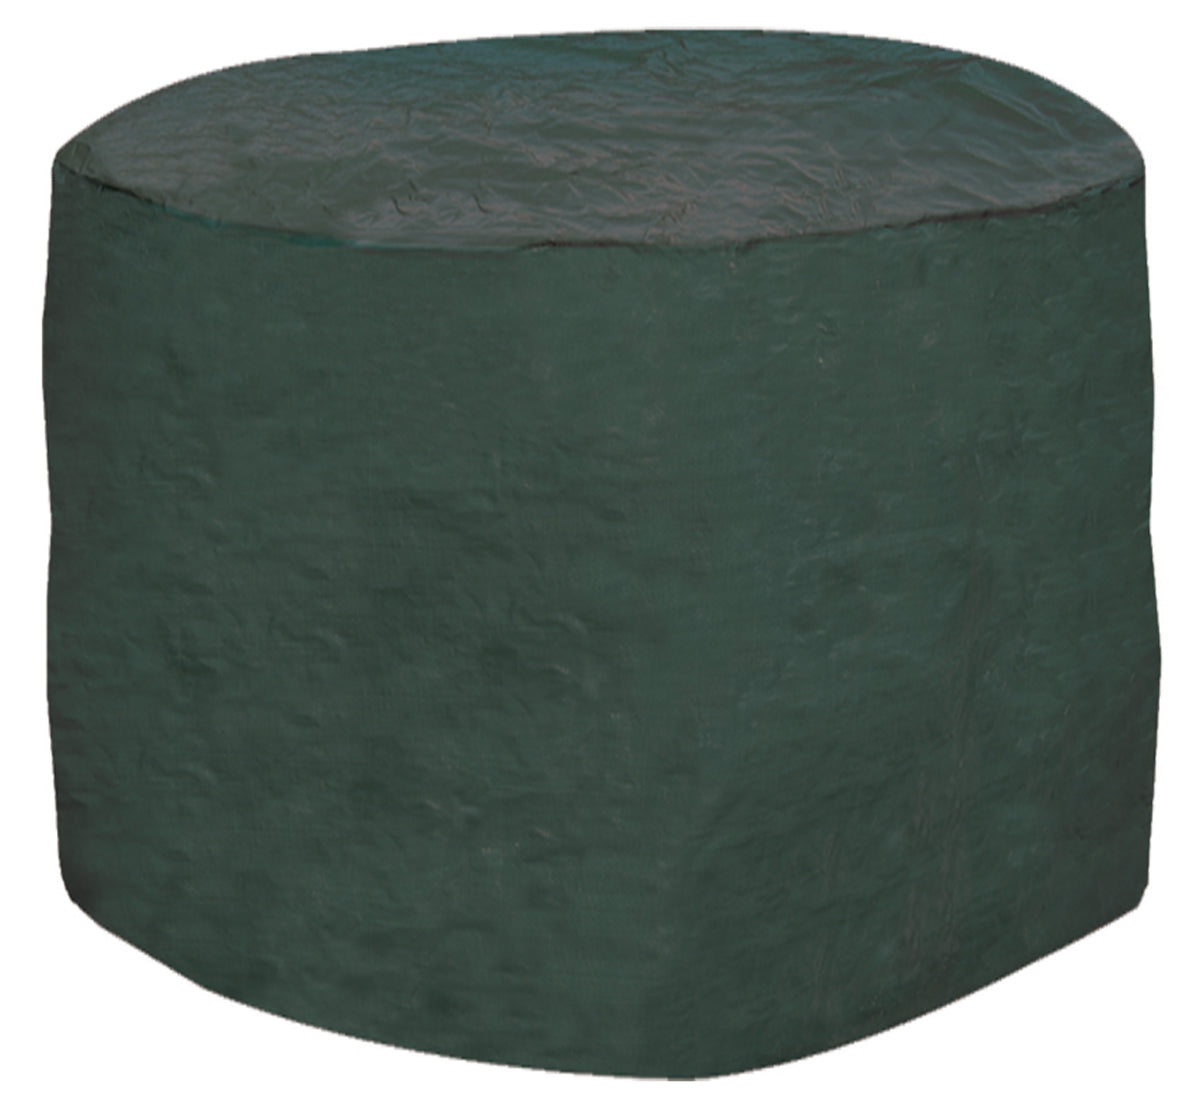 Outdoor Patio Furniture Set Cover 4 Seat Round Green